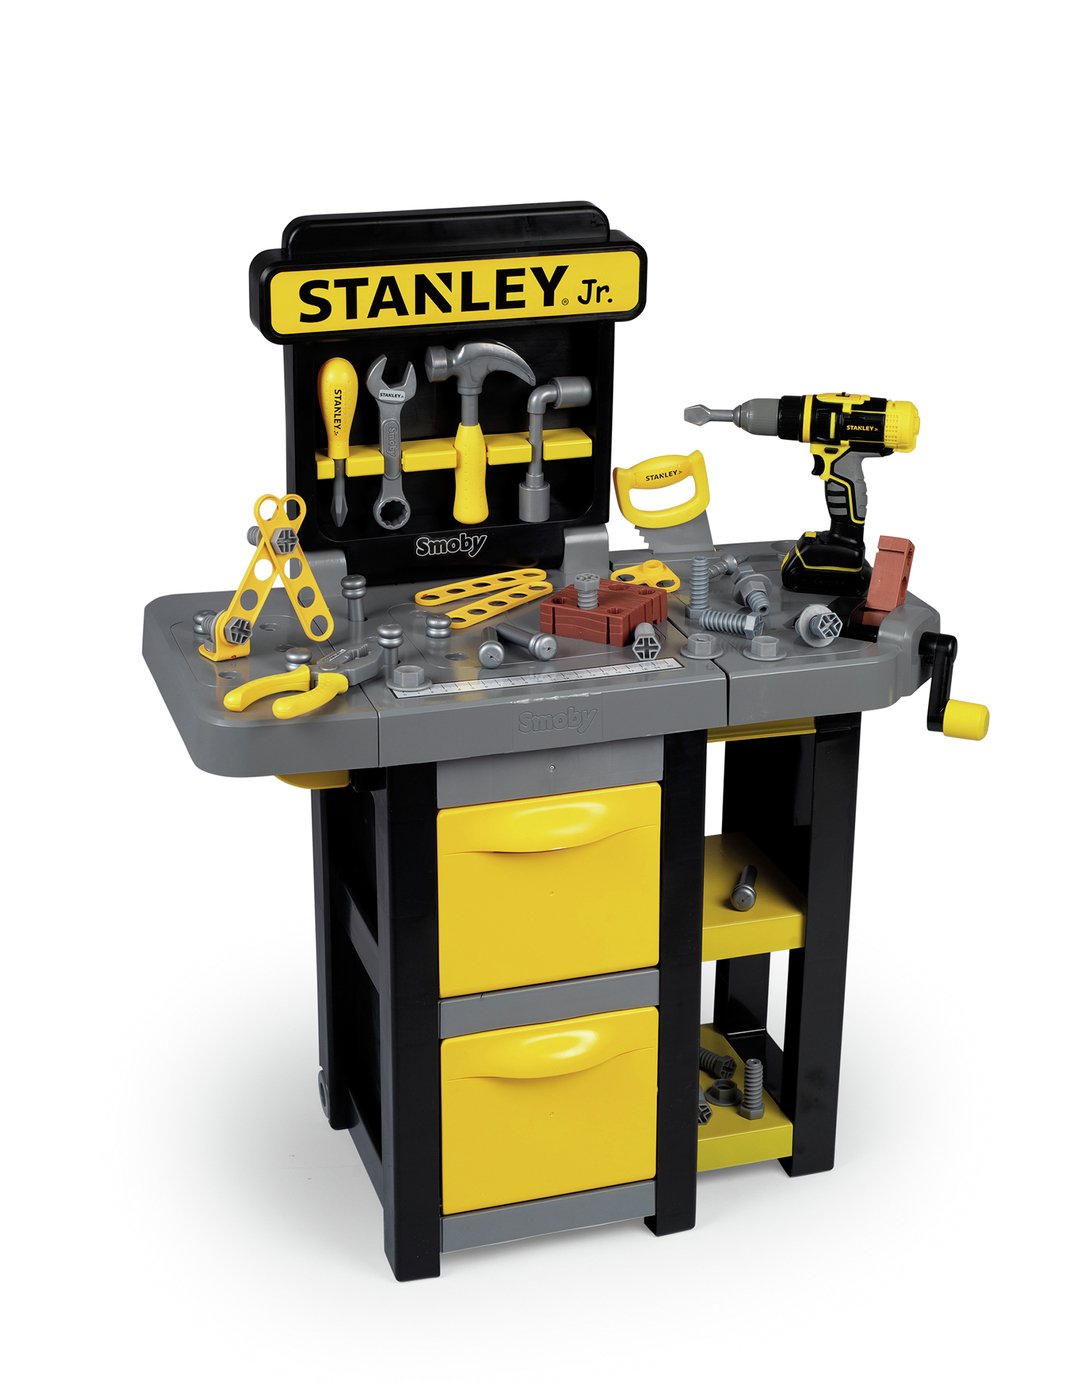 Smoby Toy Stanley Workbench Review